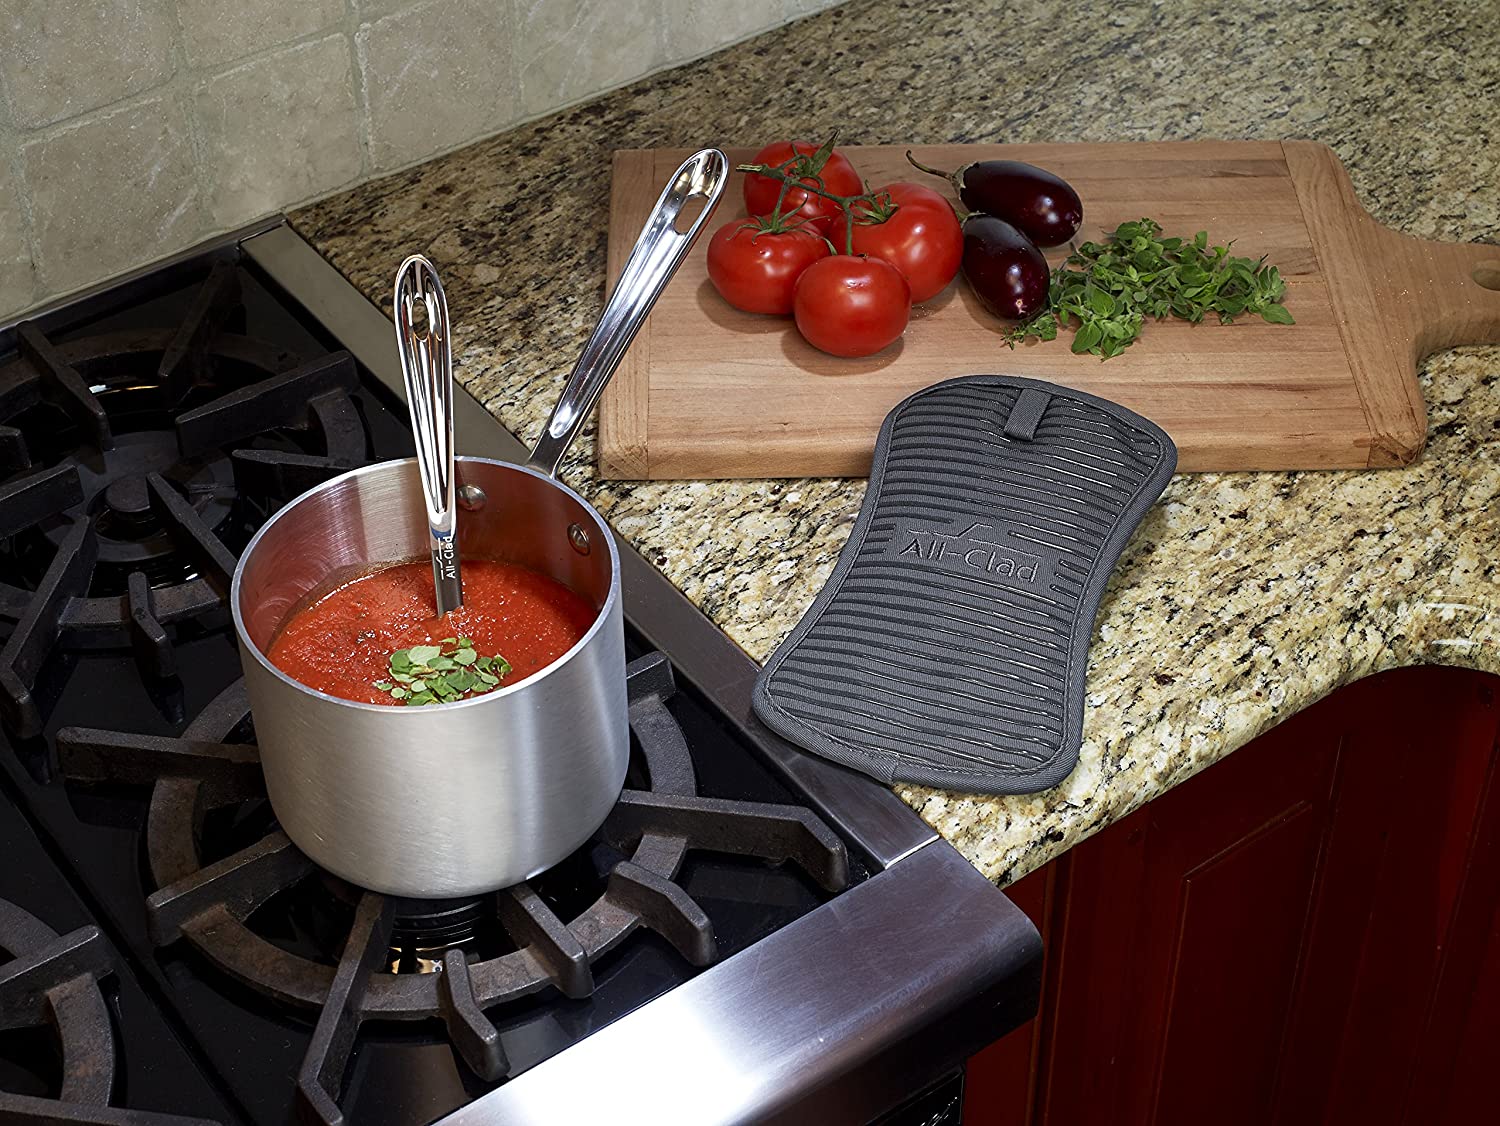 All-Clad Pewter Silicone Oven Mitt